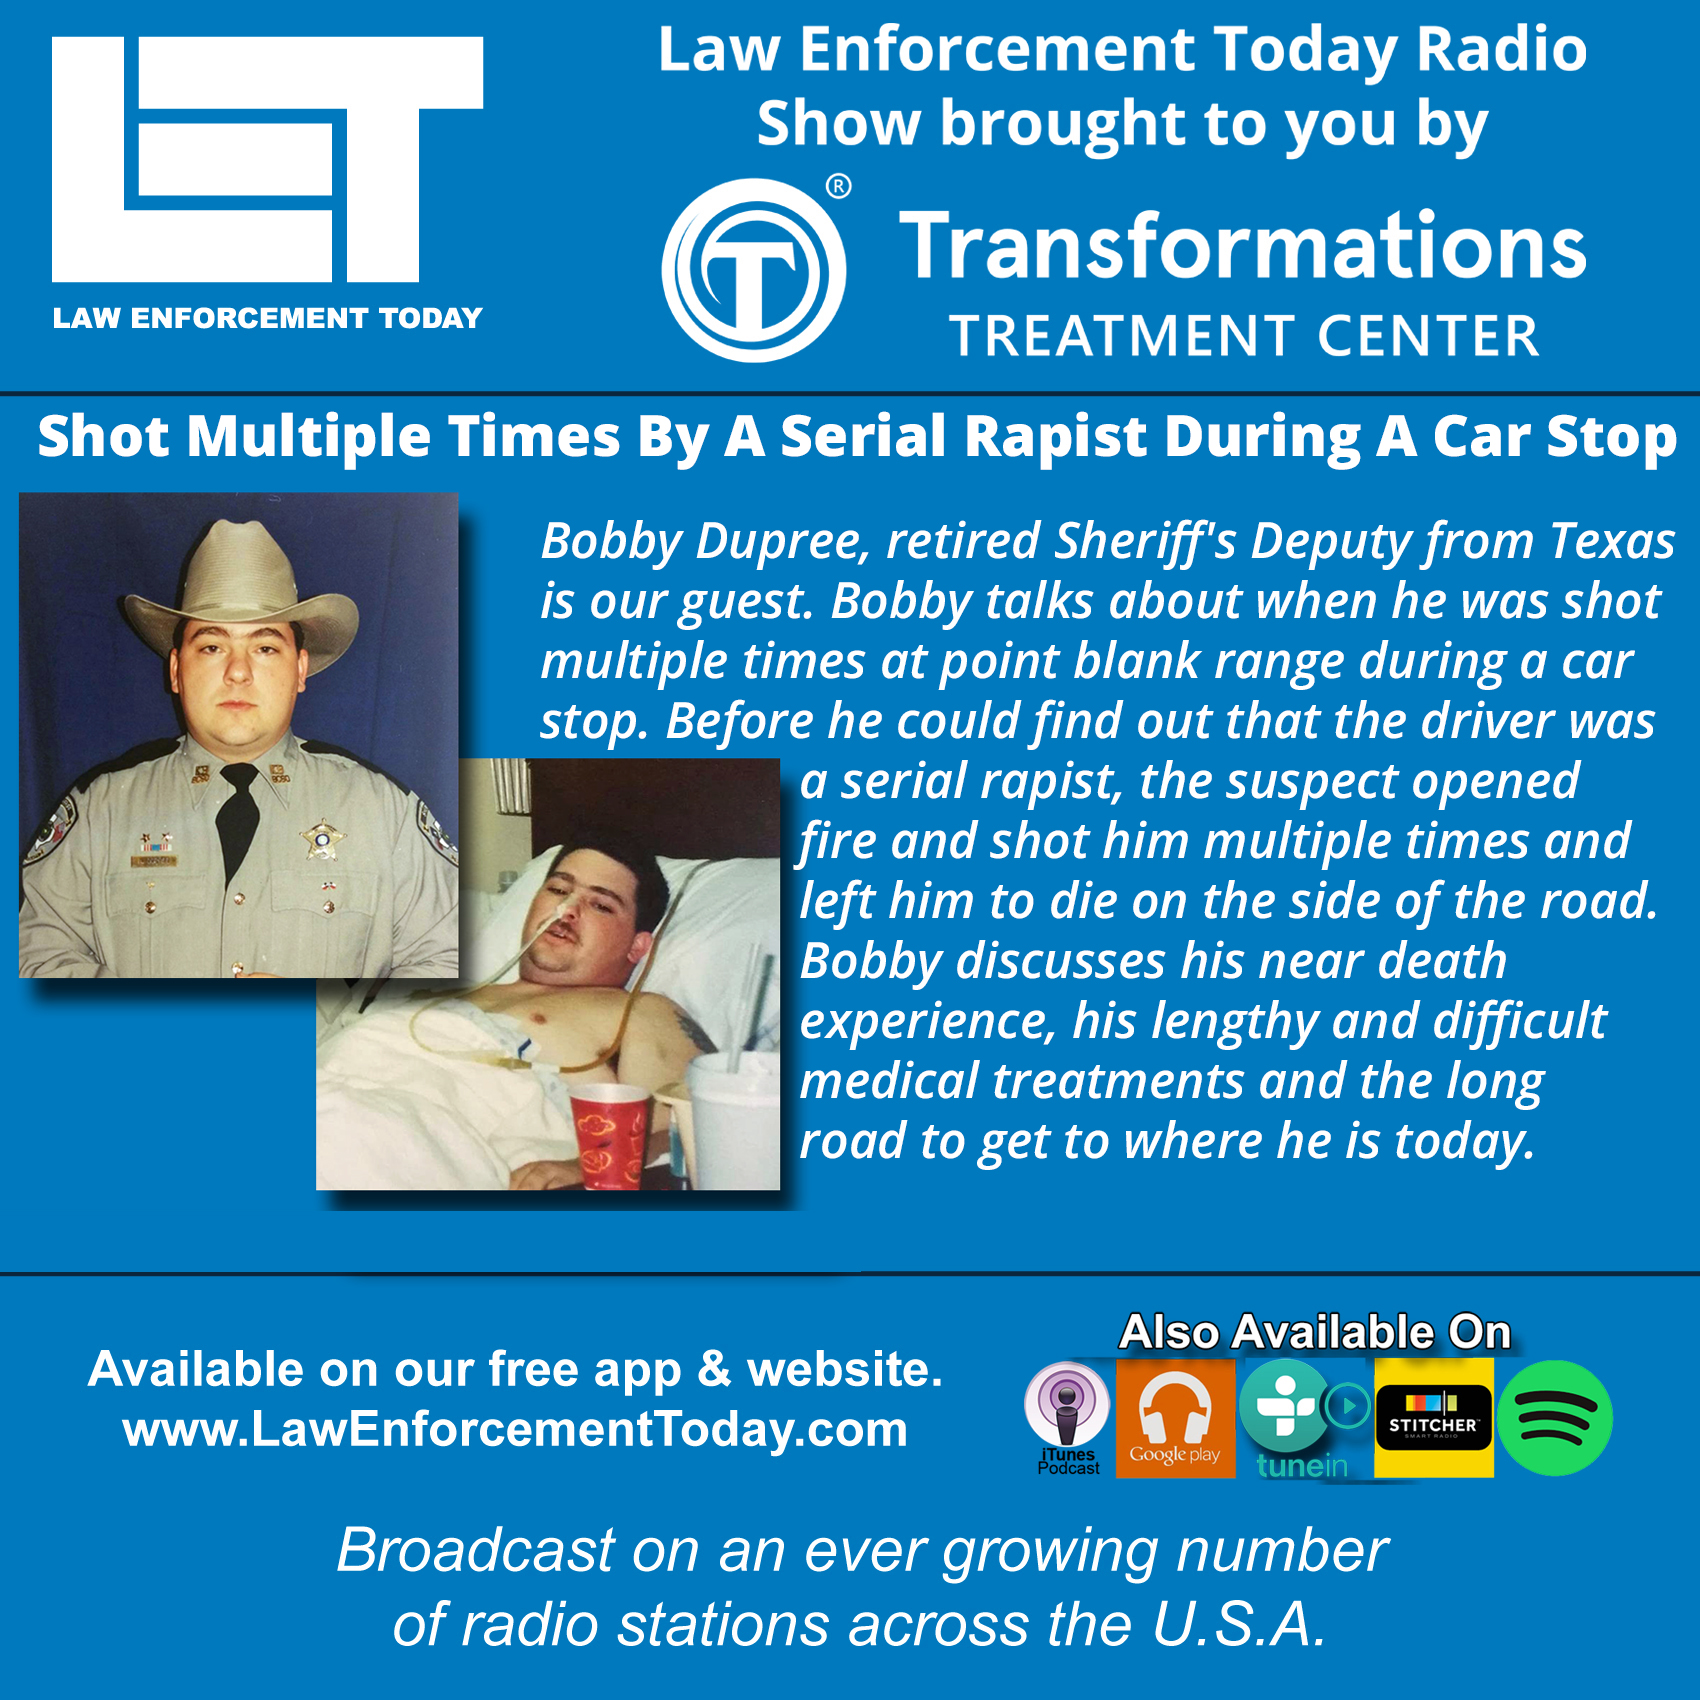 S3E6: Shot ManyTimes and Left To Die - Retired Deputy Bobby Dupree